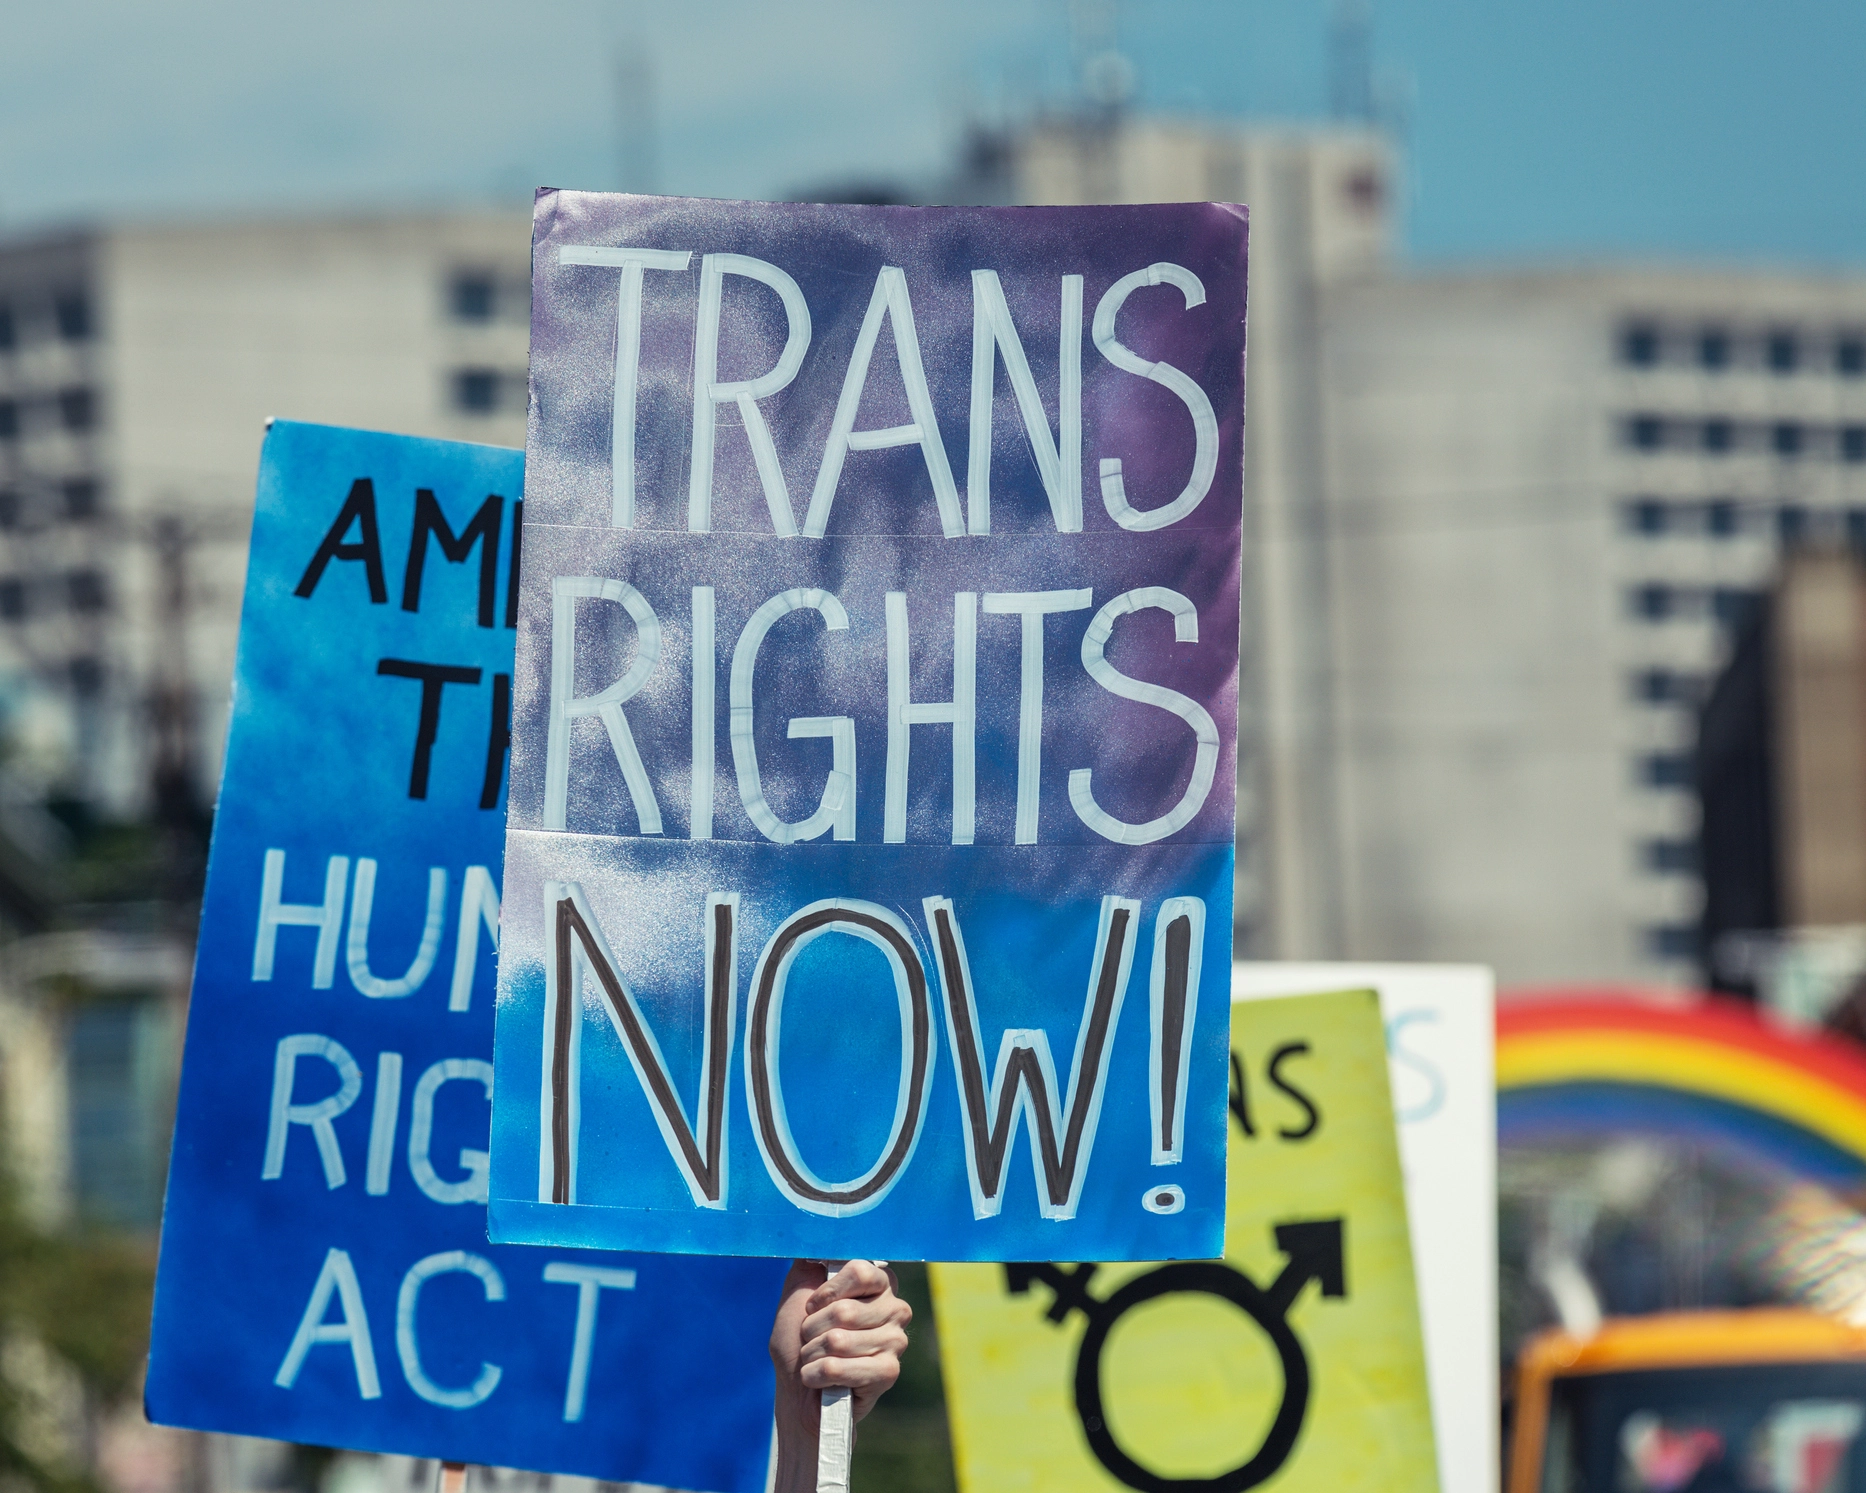 Protest signs advocating for transgender rights, with the prominent message 'TRANS RIGHTS NOW!